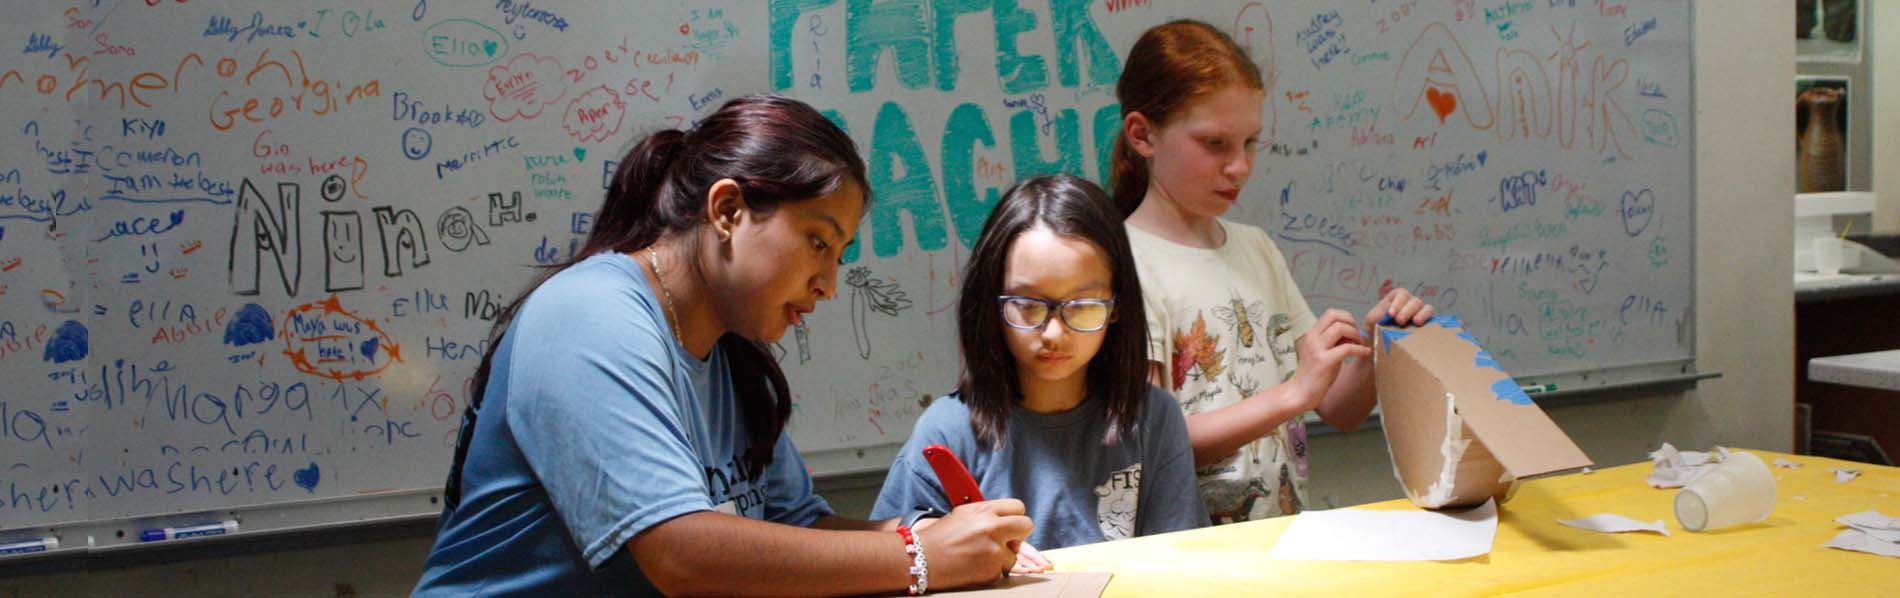 Staff shows a girl how to cut the carboard, while another student puts together hers